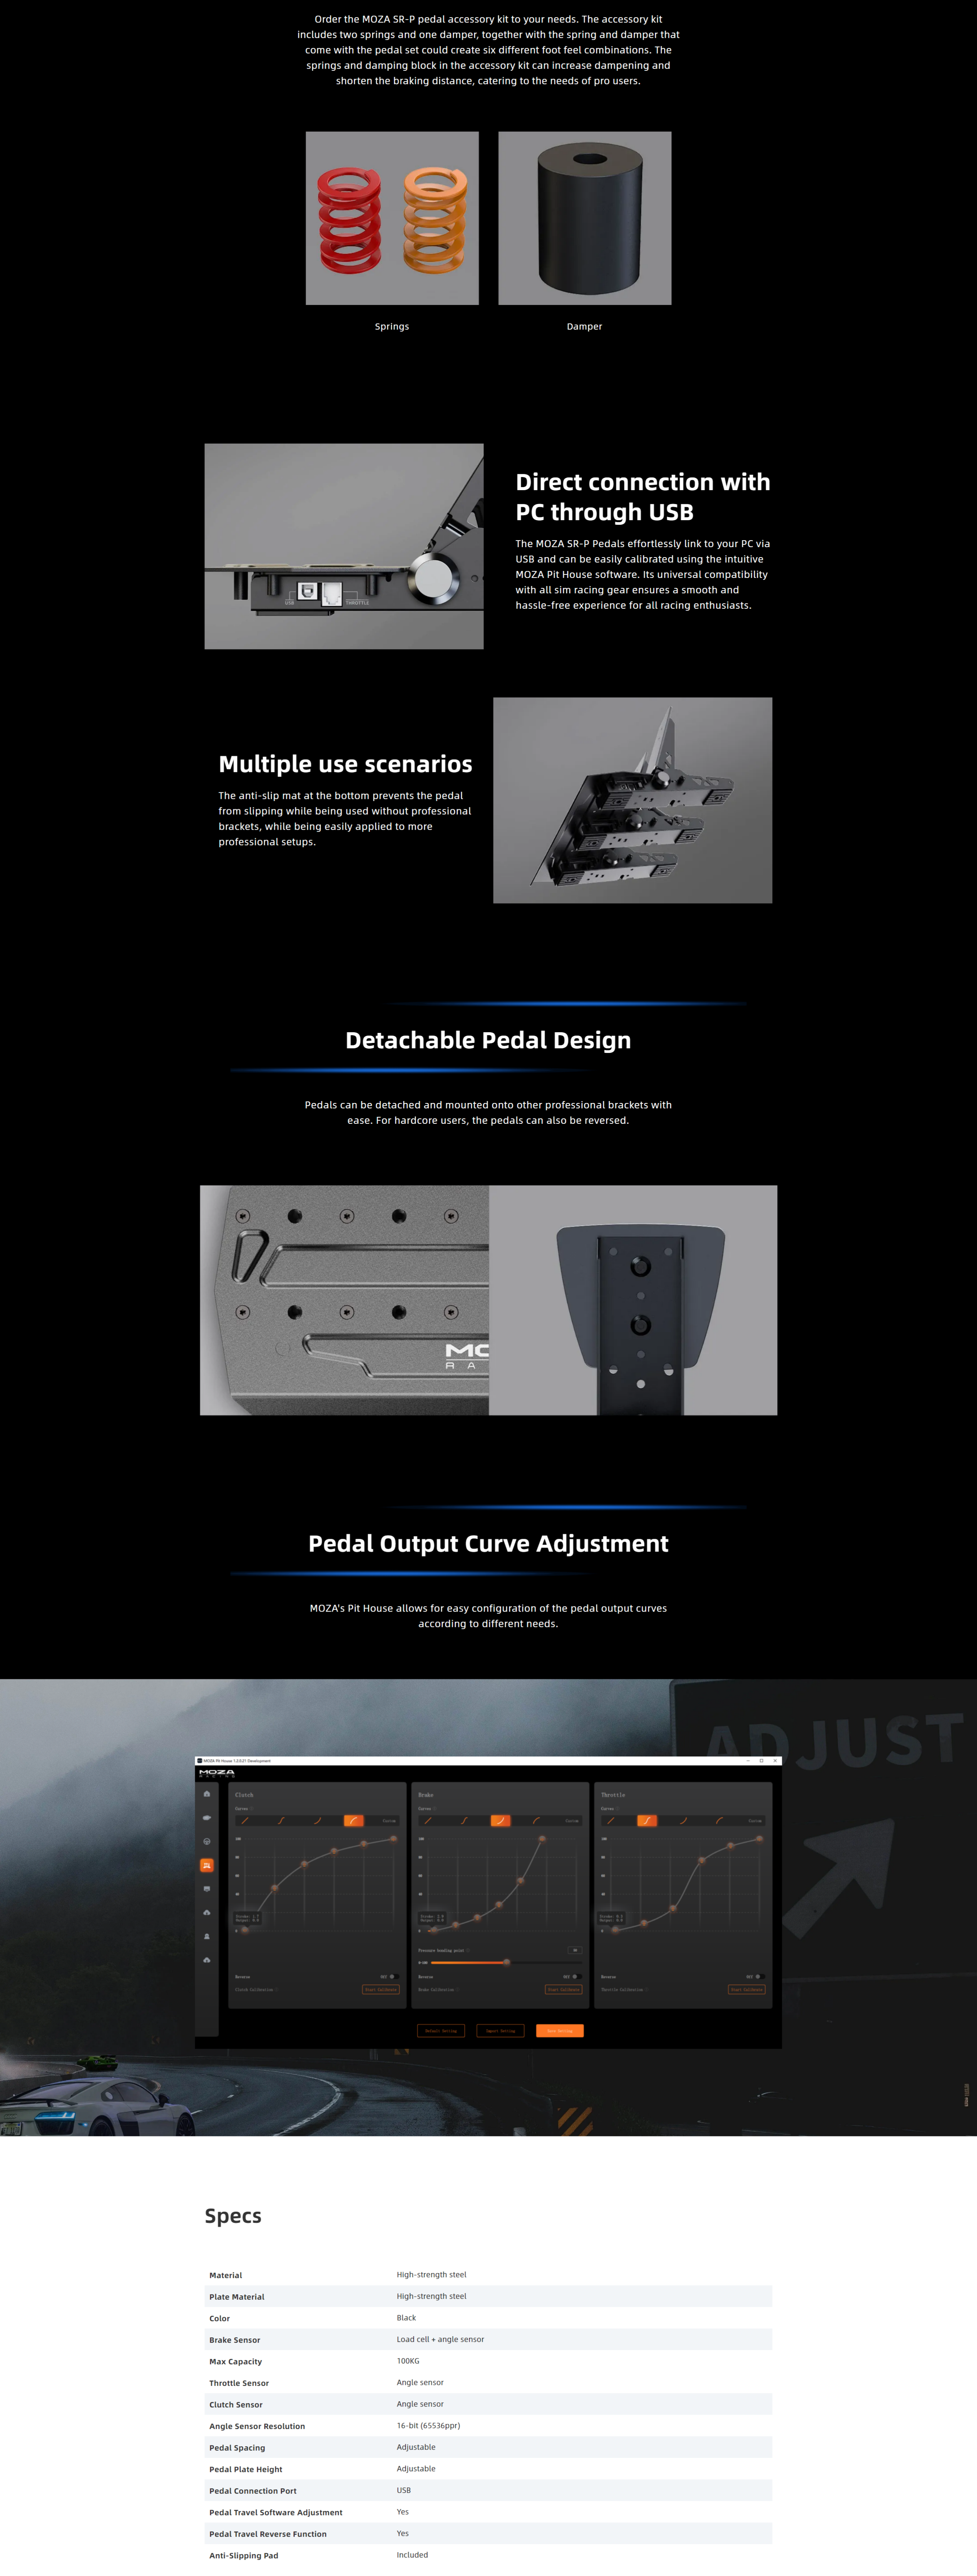 A large marketing image providing additional information about the product MOZA SR-P Clutch Pedal - Additional alt info not provided